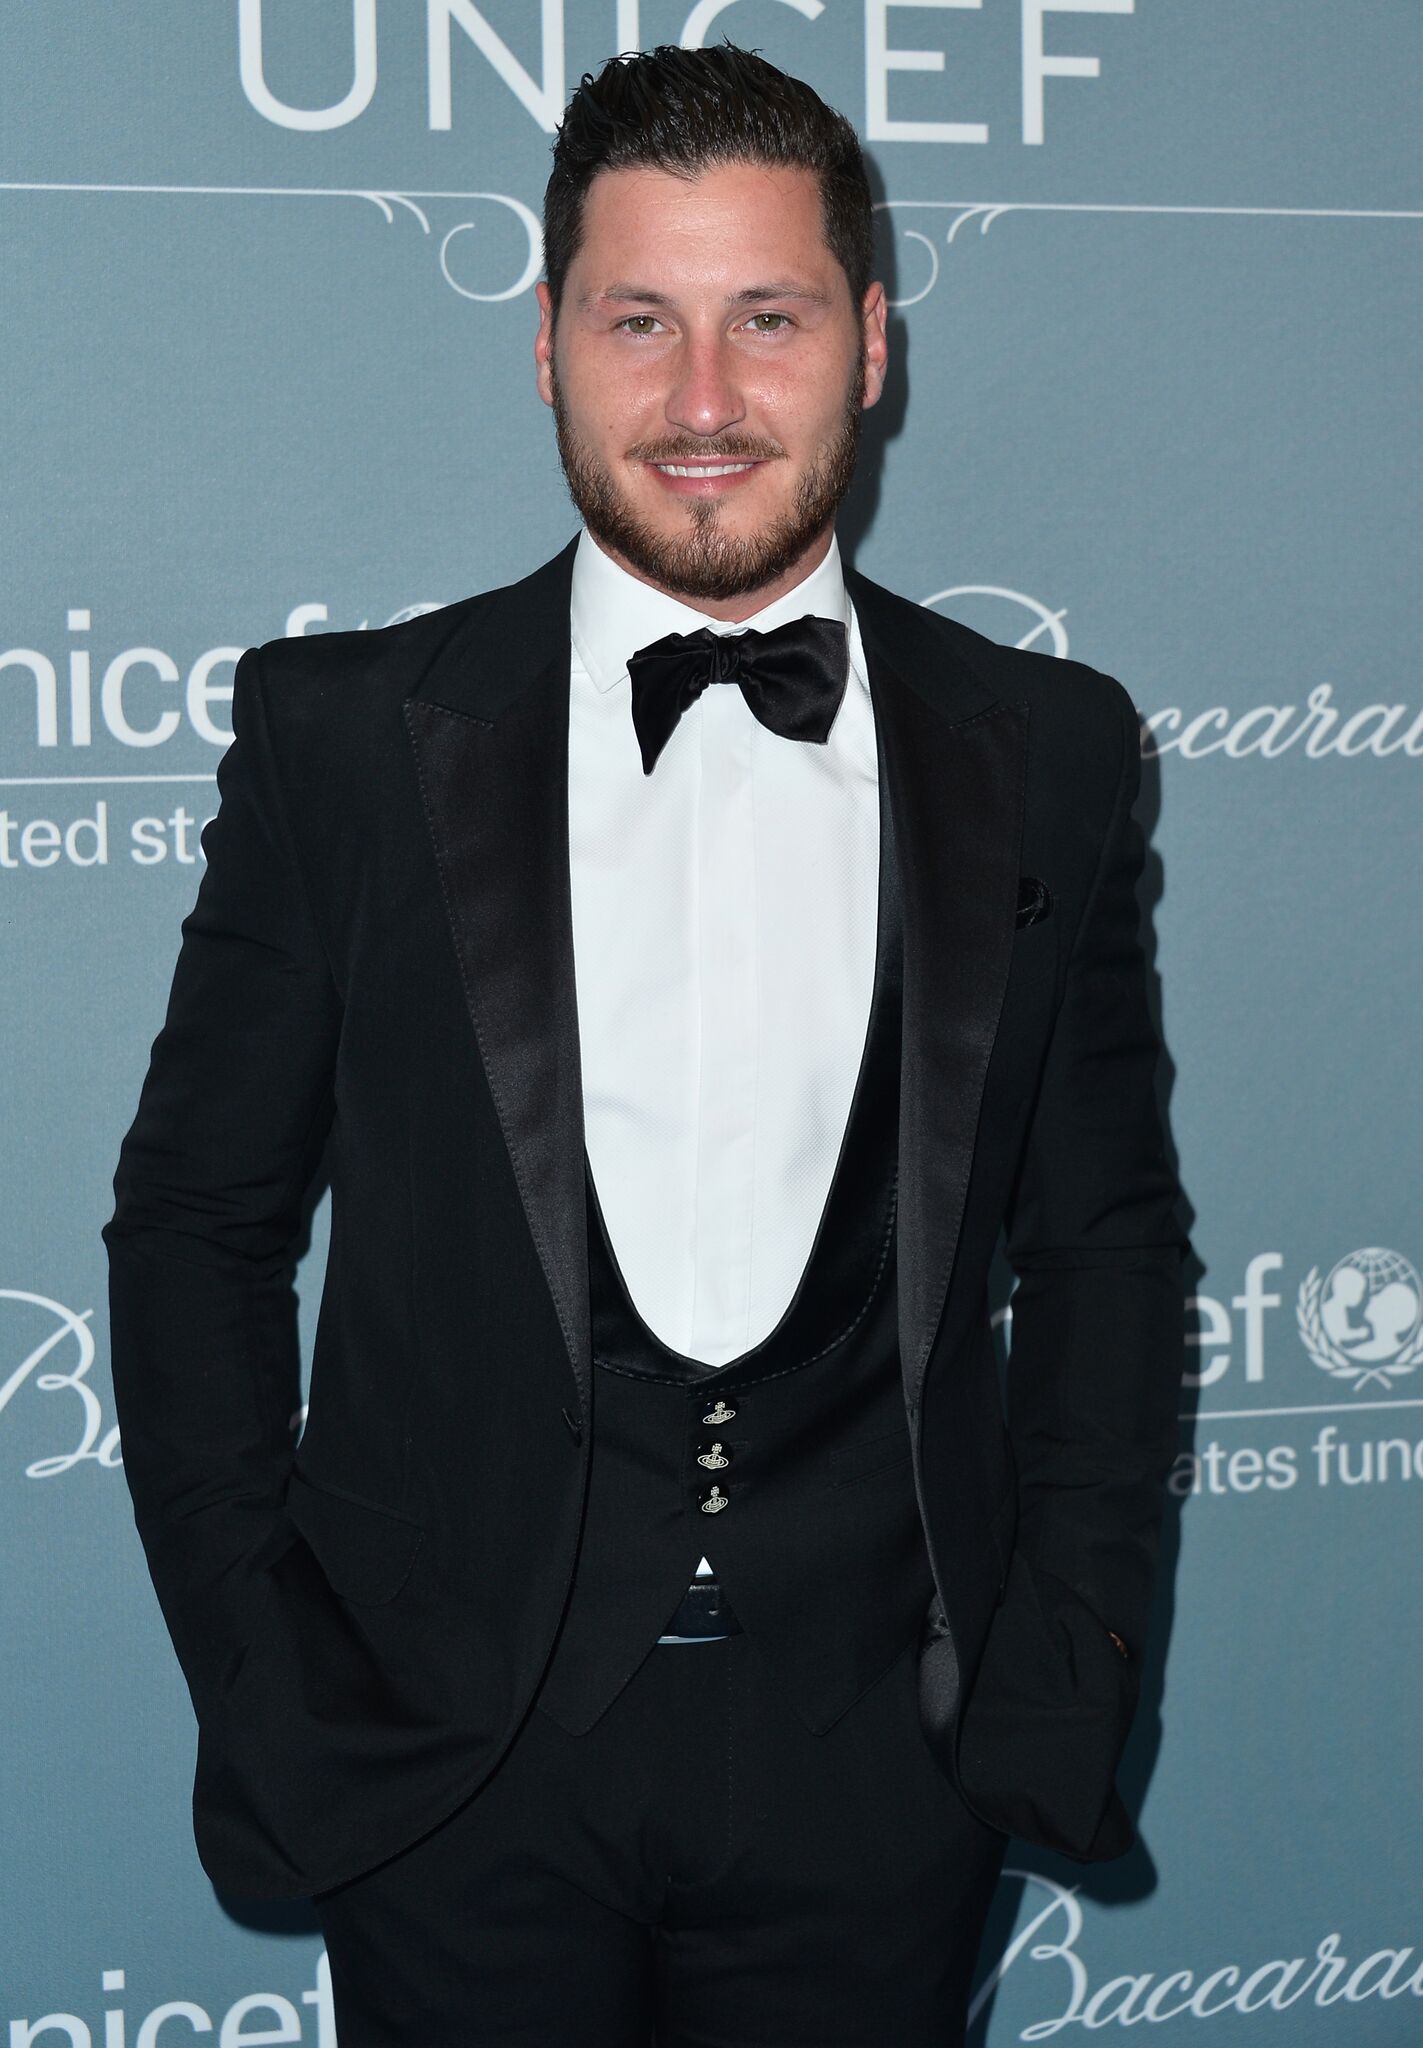 Val Chmerkovskiy arrives to the 2014 UNICEF Ball Presented by Baccarat at the Regent Beverly Wilshire Hotel | Getty Images